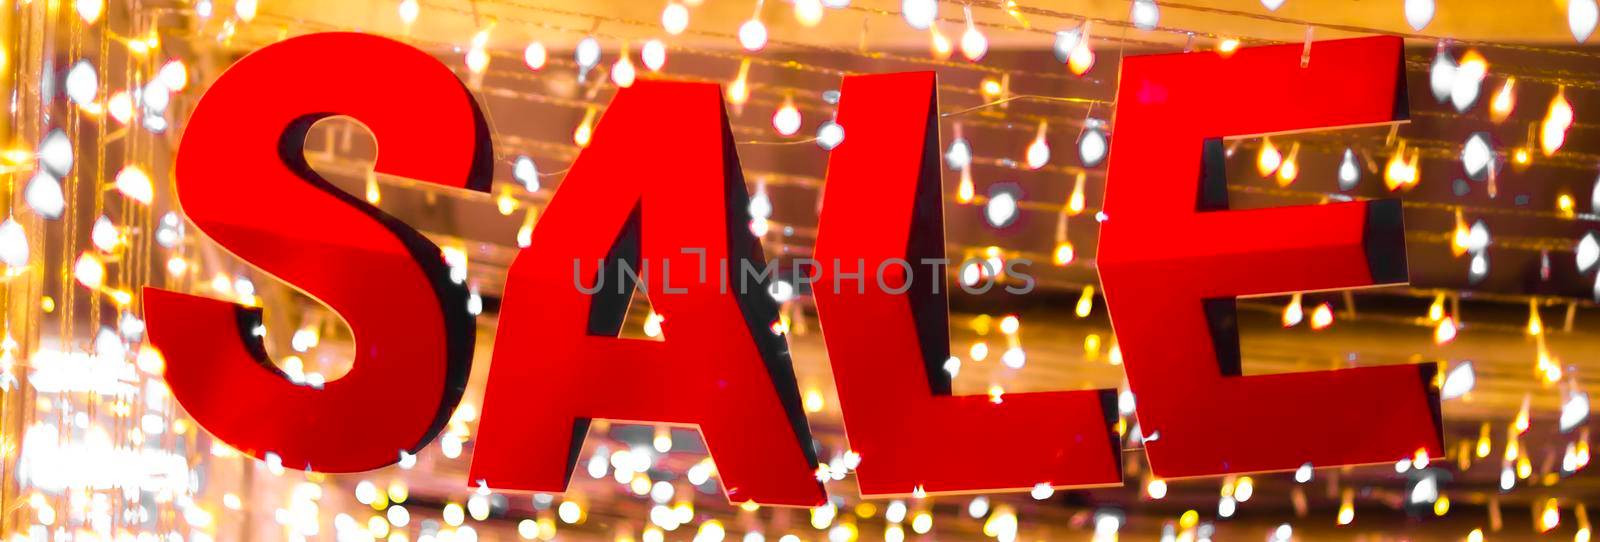 store discount sign . shopping sale background . Red sale background. Shine backdrop for flyer, poster, shopping, for sale sign, discount, marketing, selling, banner, web, header. Abstract golden by Petrichor